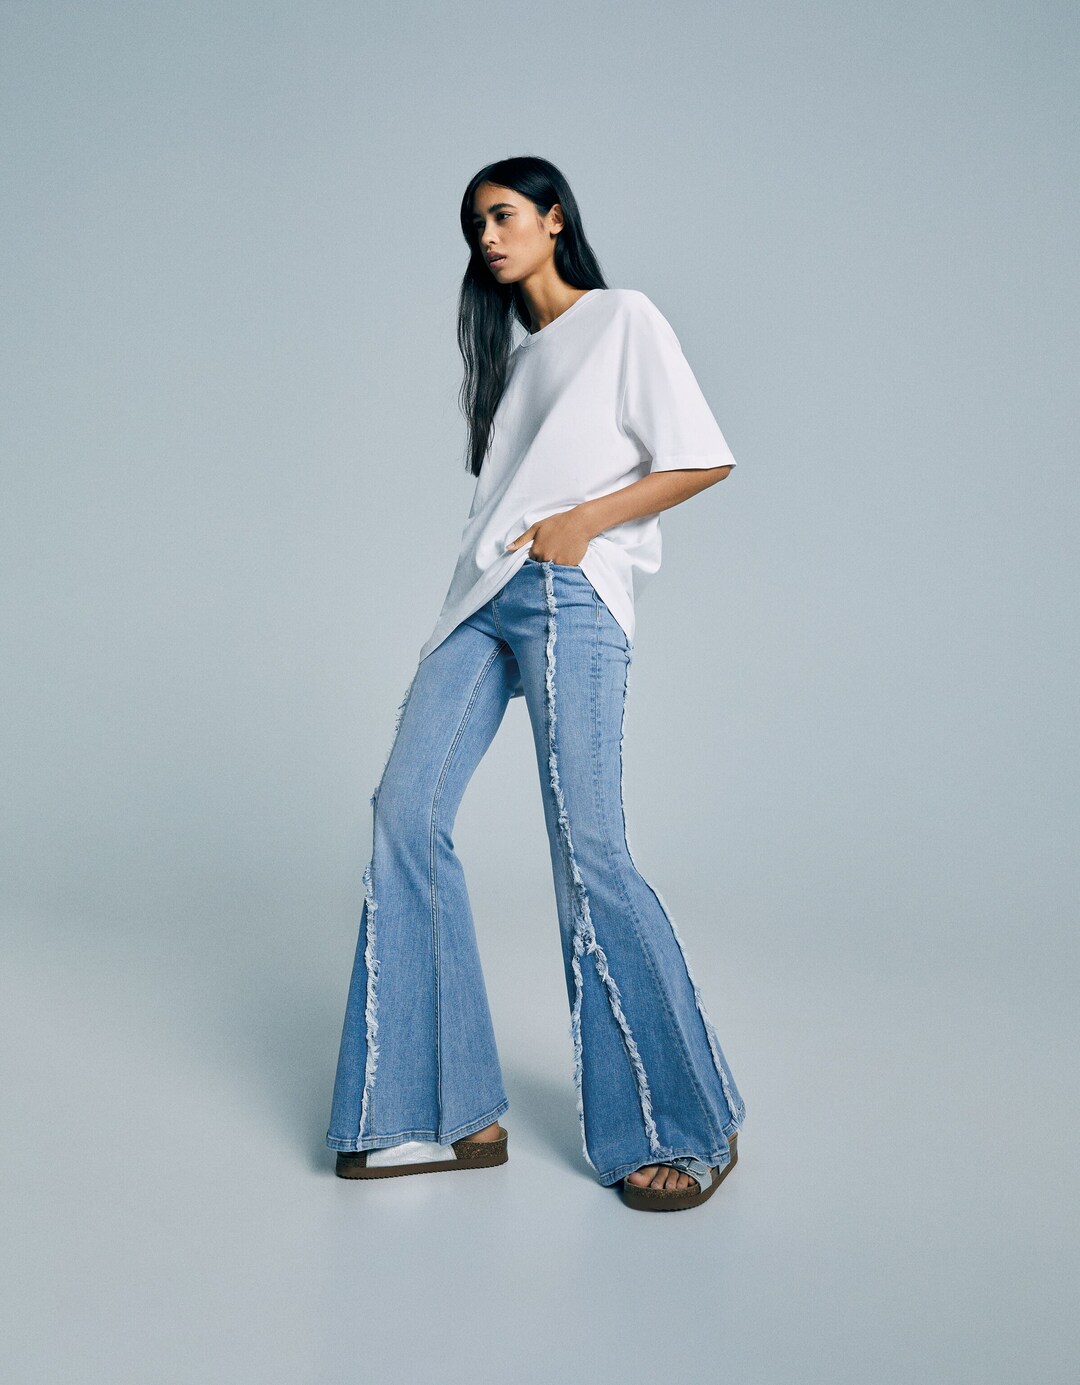 ’70s flare jeans